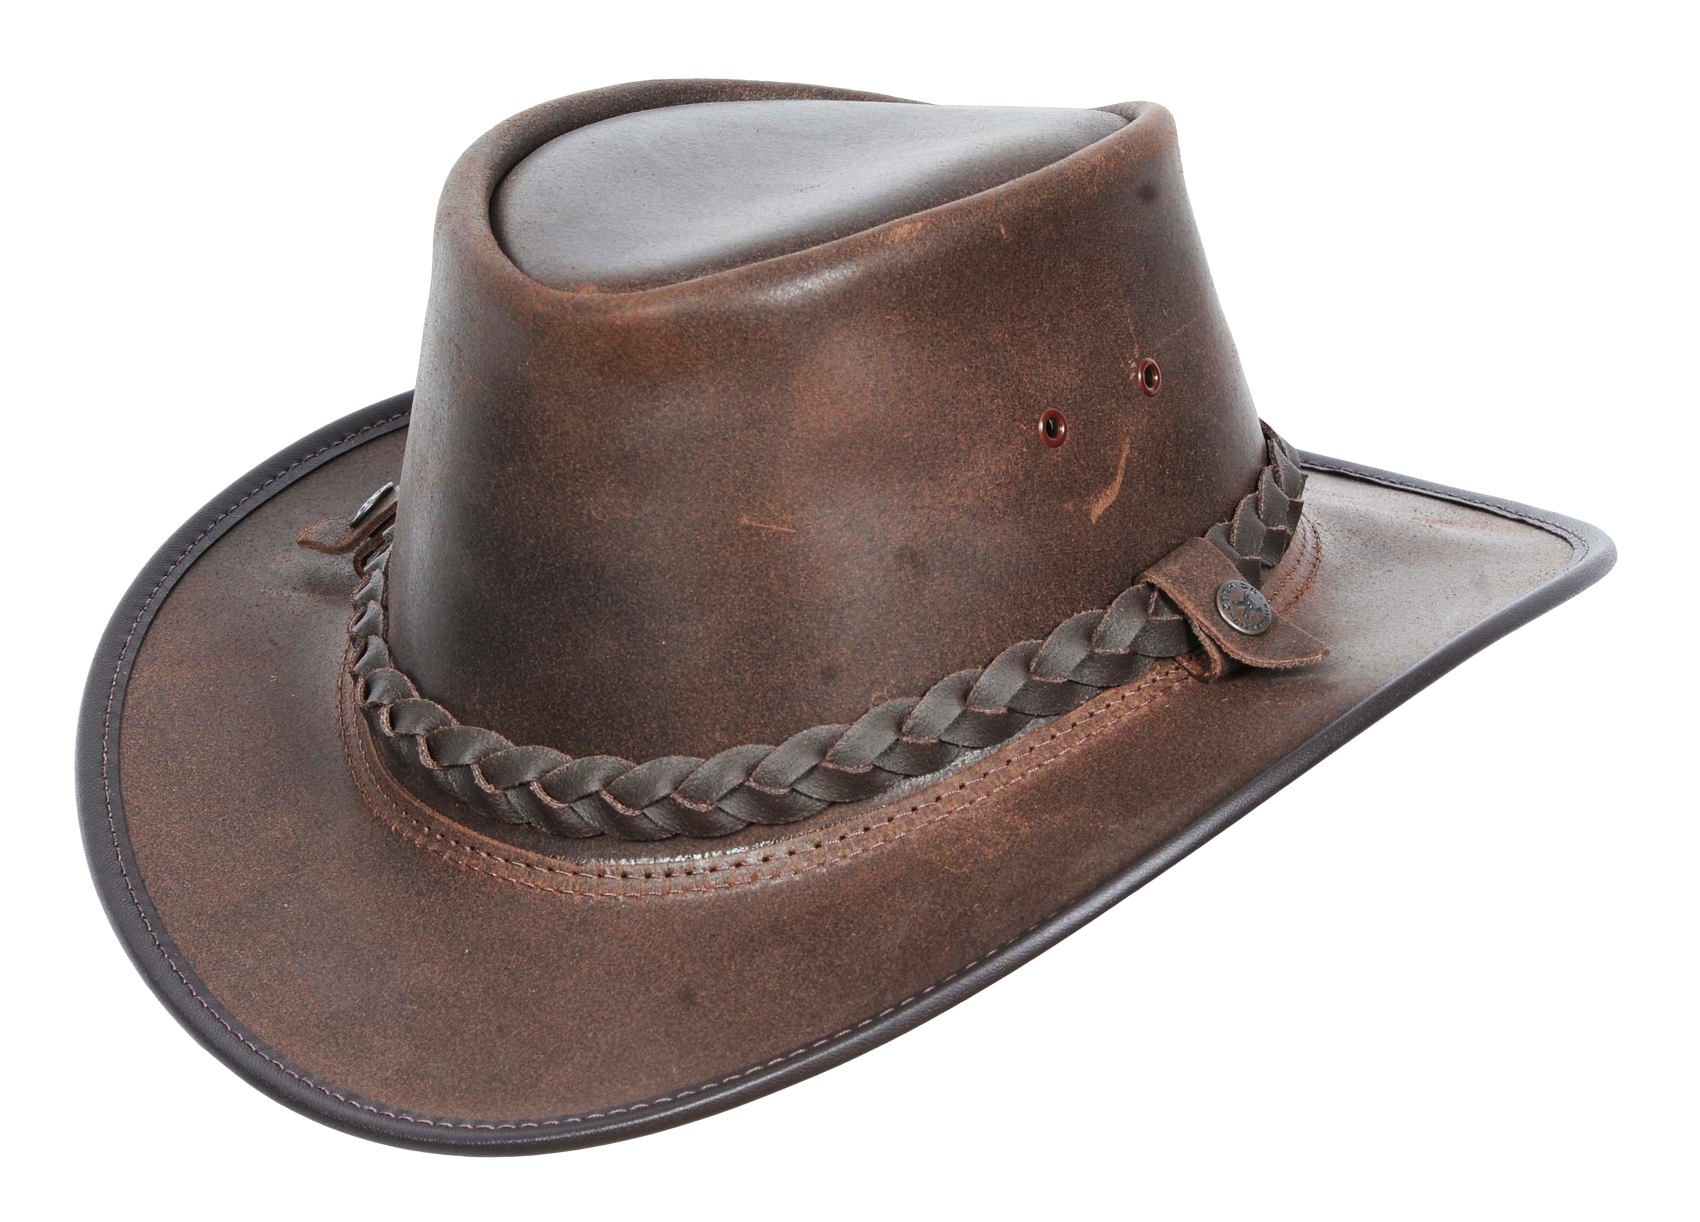 A Brown Leather Hat With A Braided Band